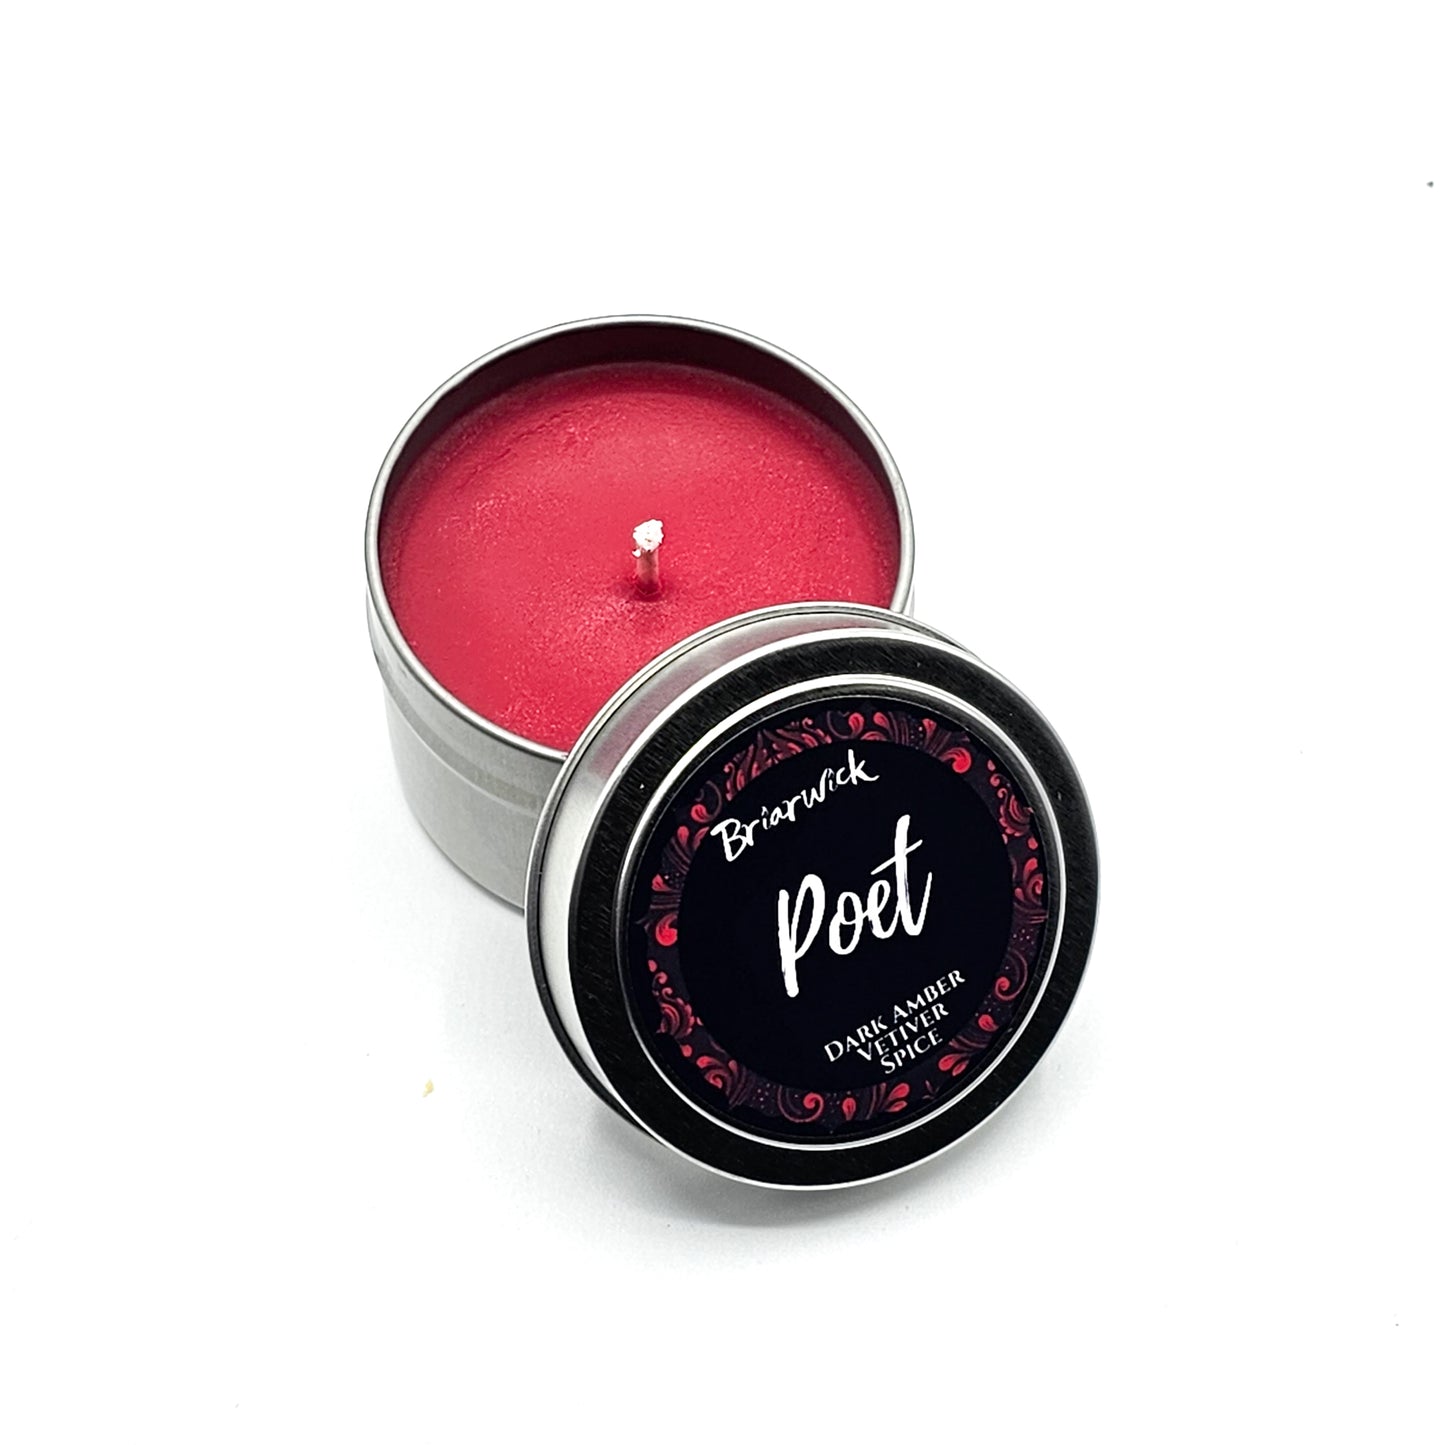 Poet Candle- Foolish Kingdoms Inspired- Officially Licensed Soy Vegan Candle